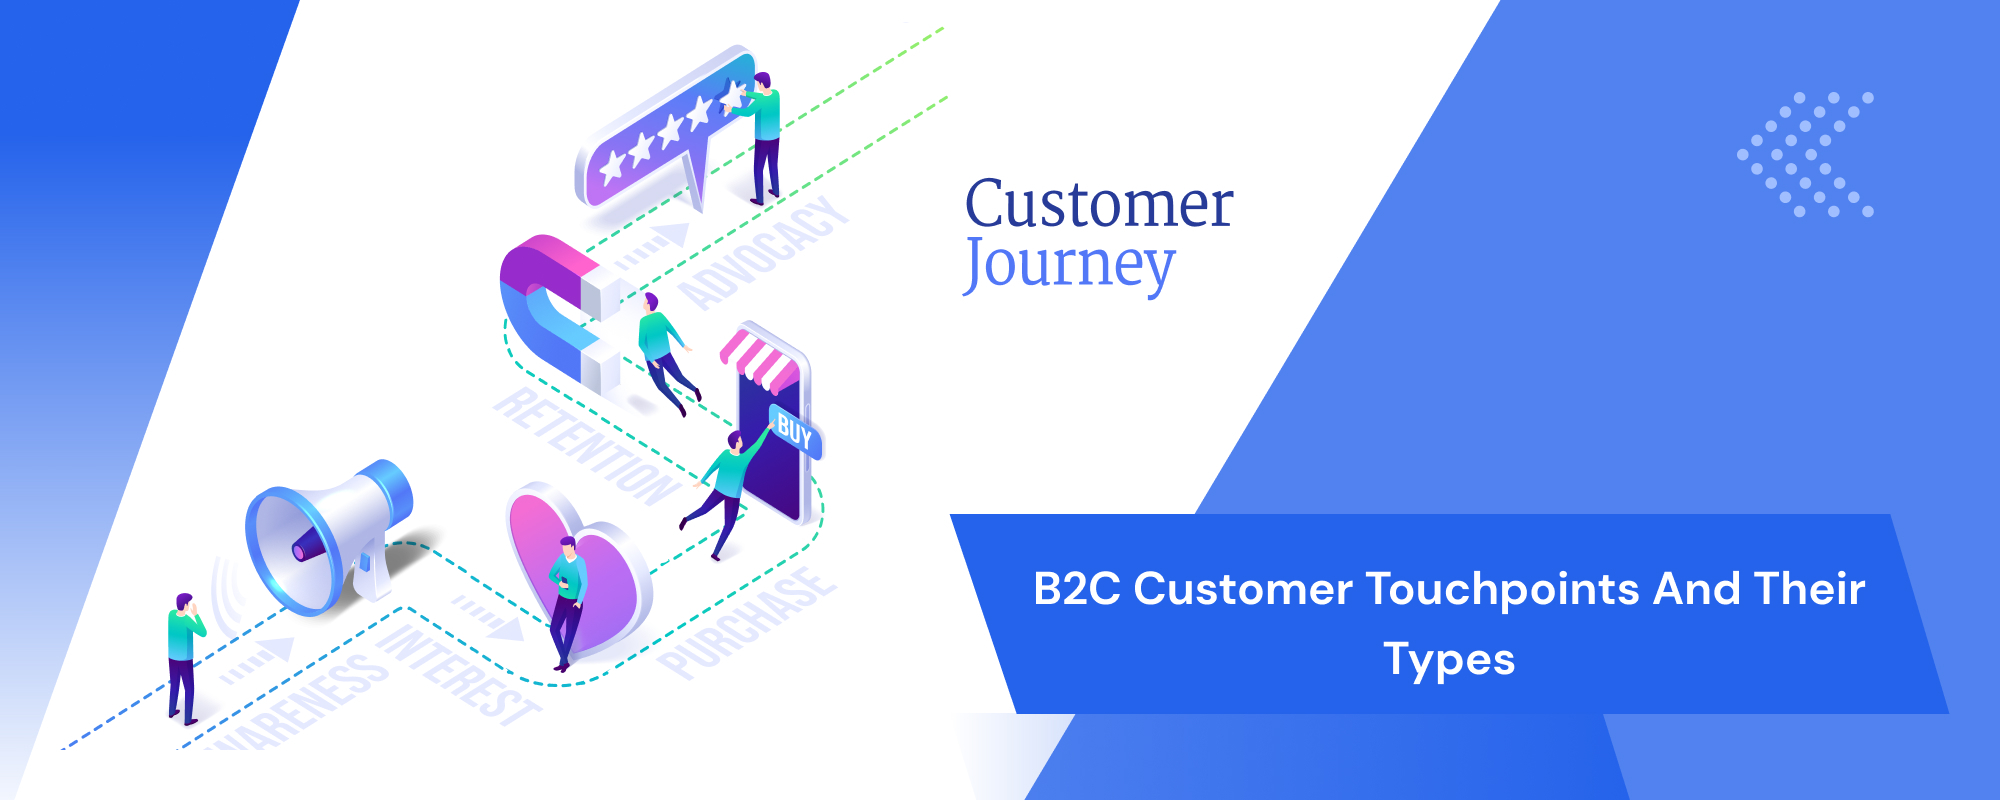 B2C Customer Touchpoints and Their Types